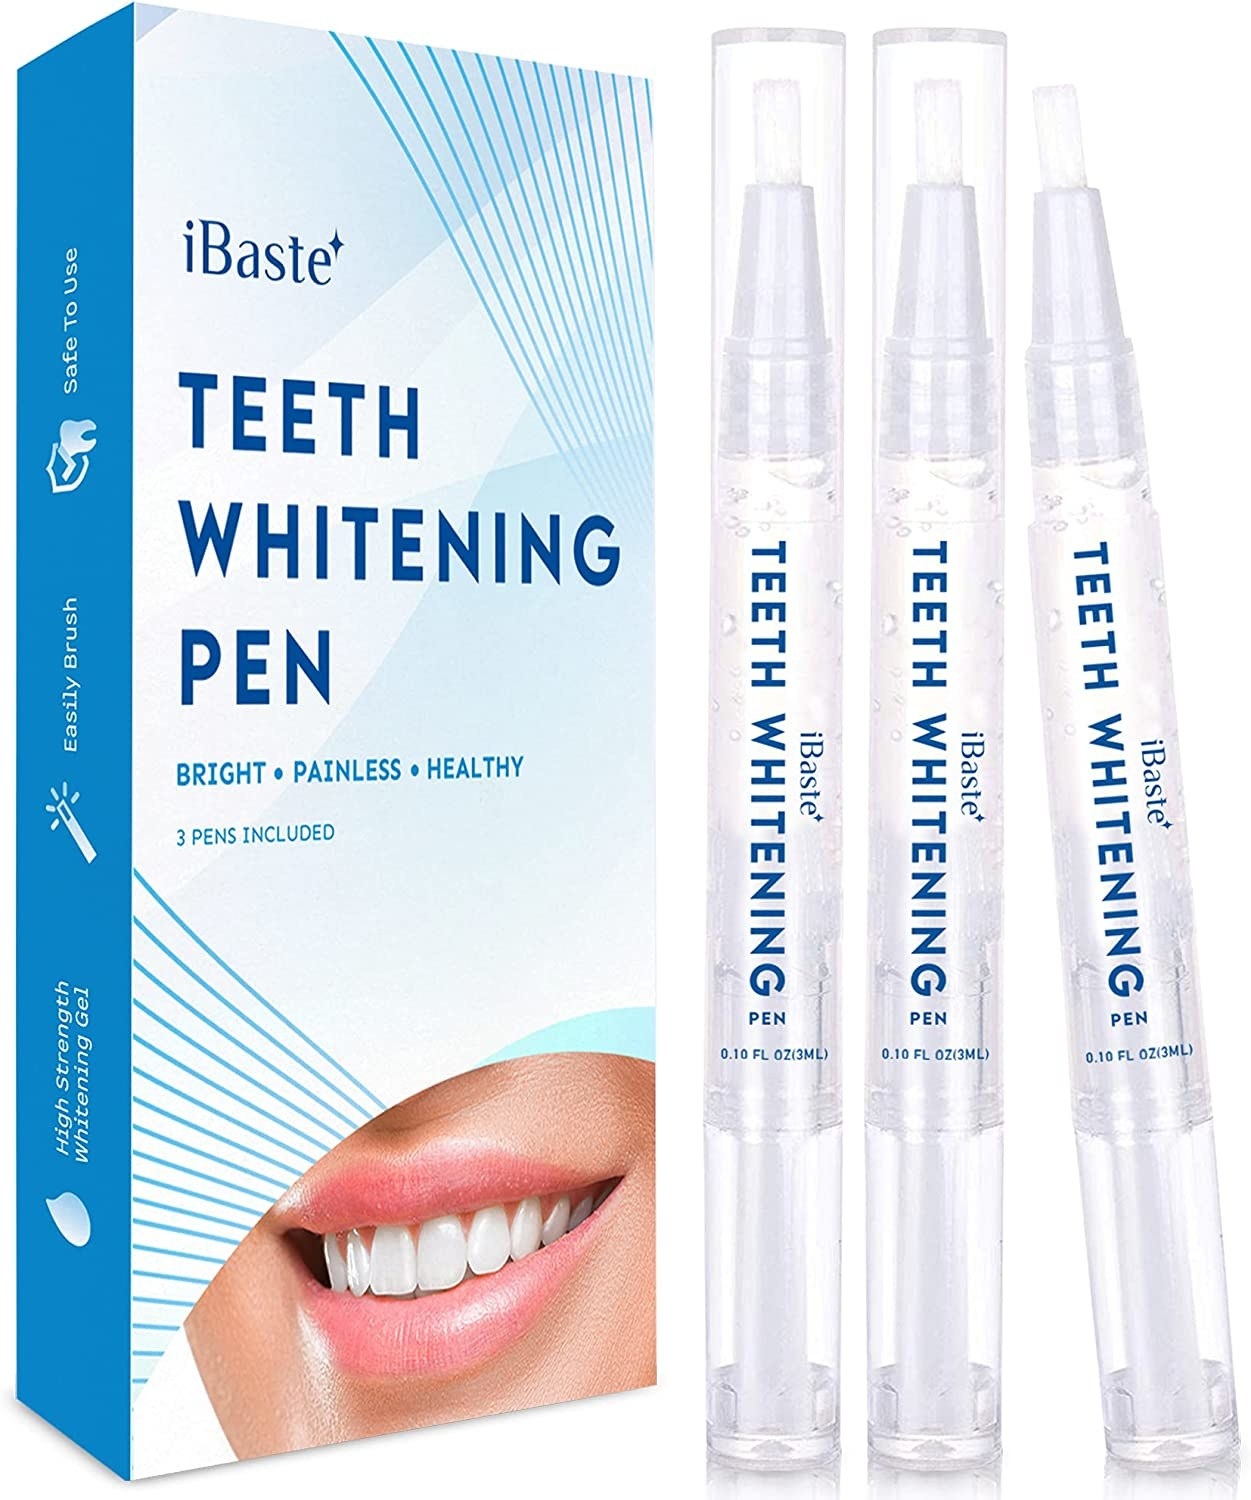 Three of the teeth whitening pens beside the packaging